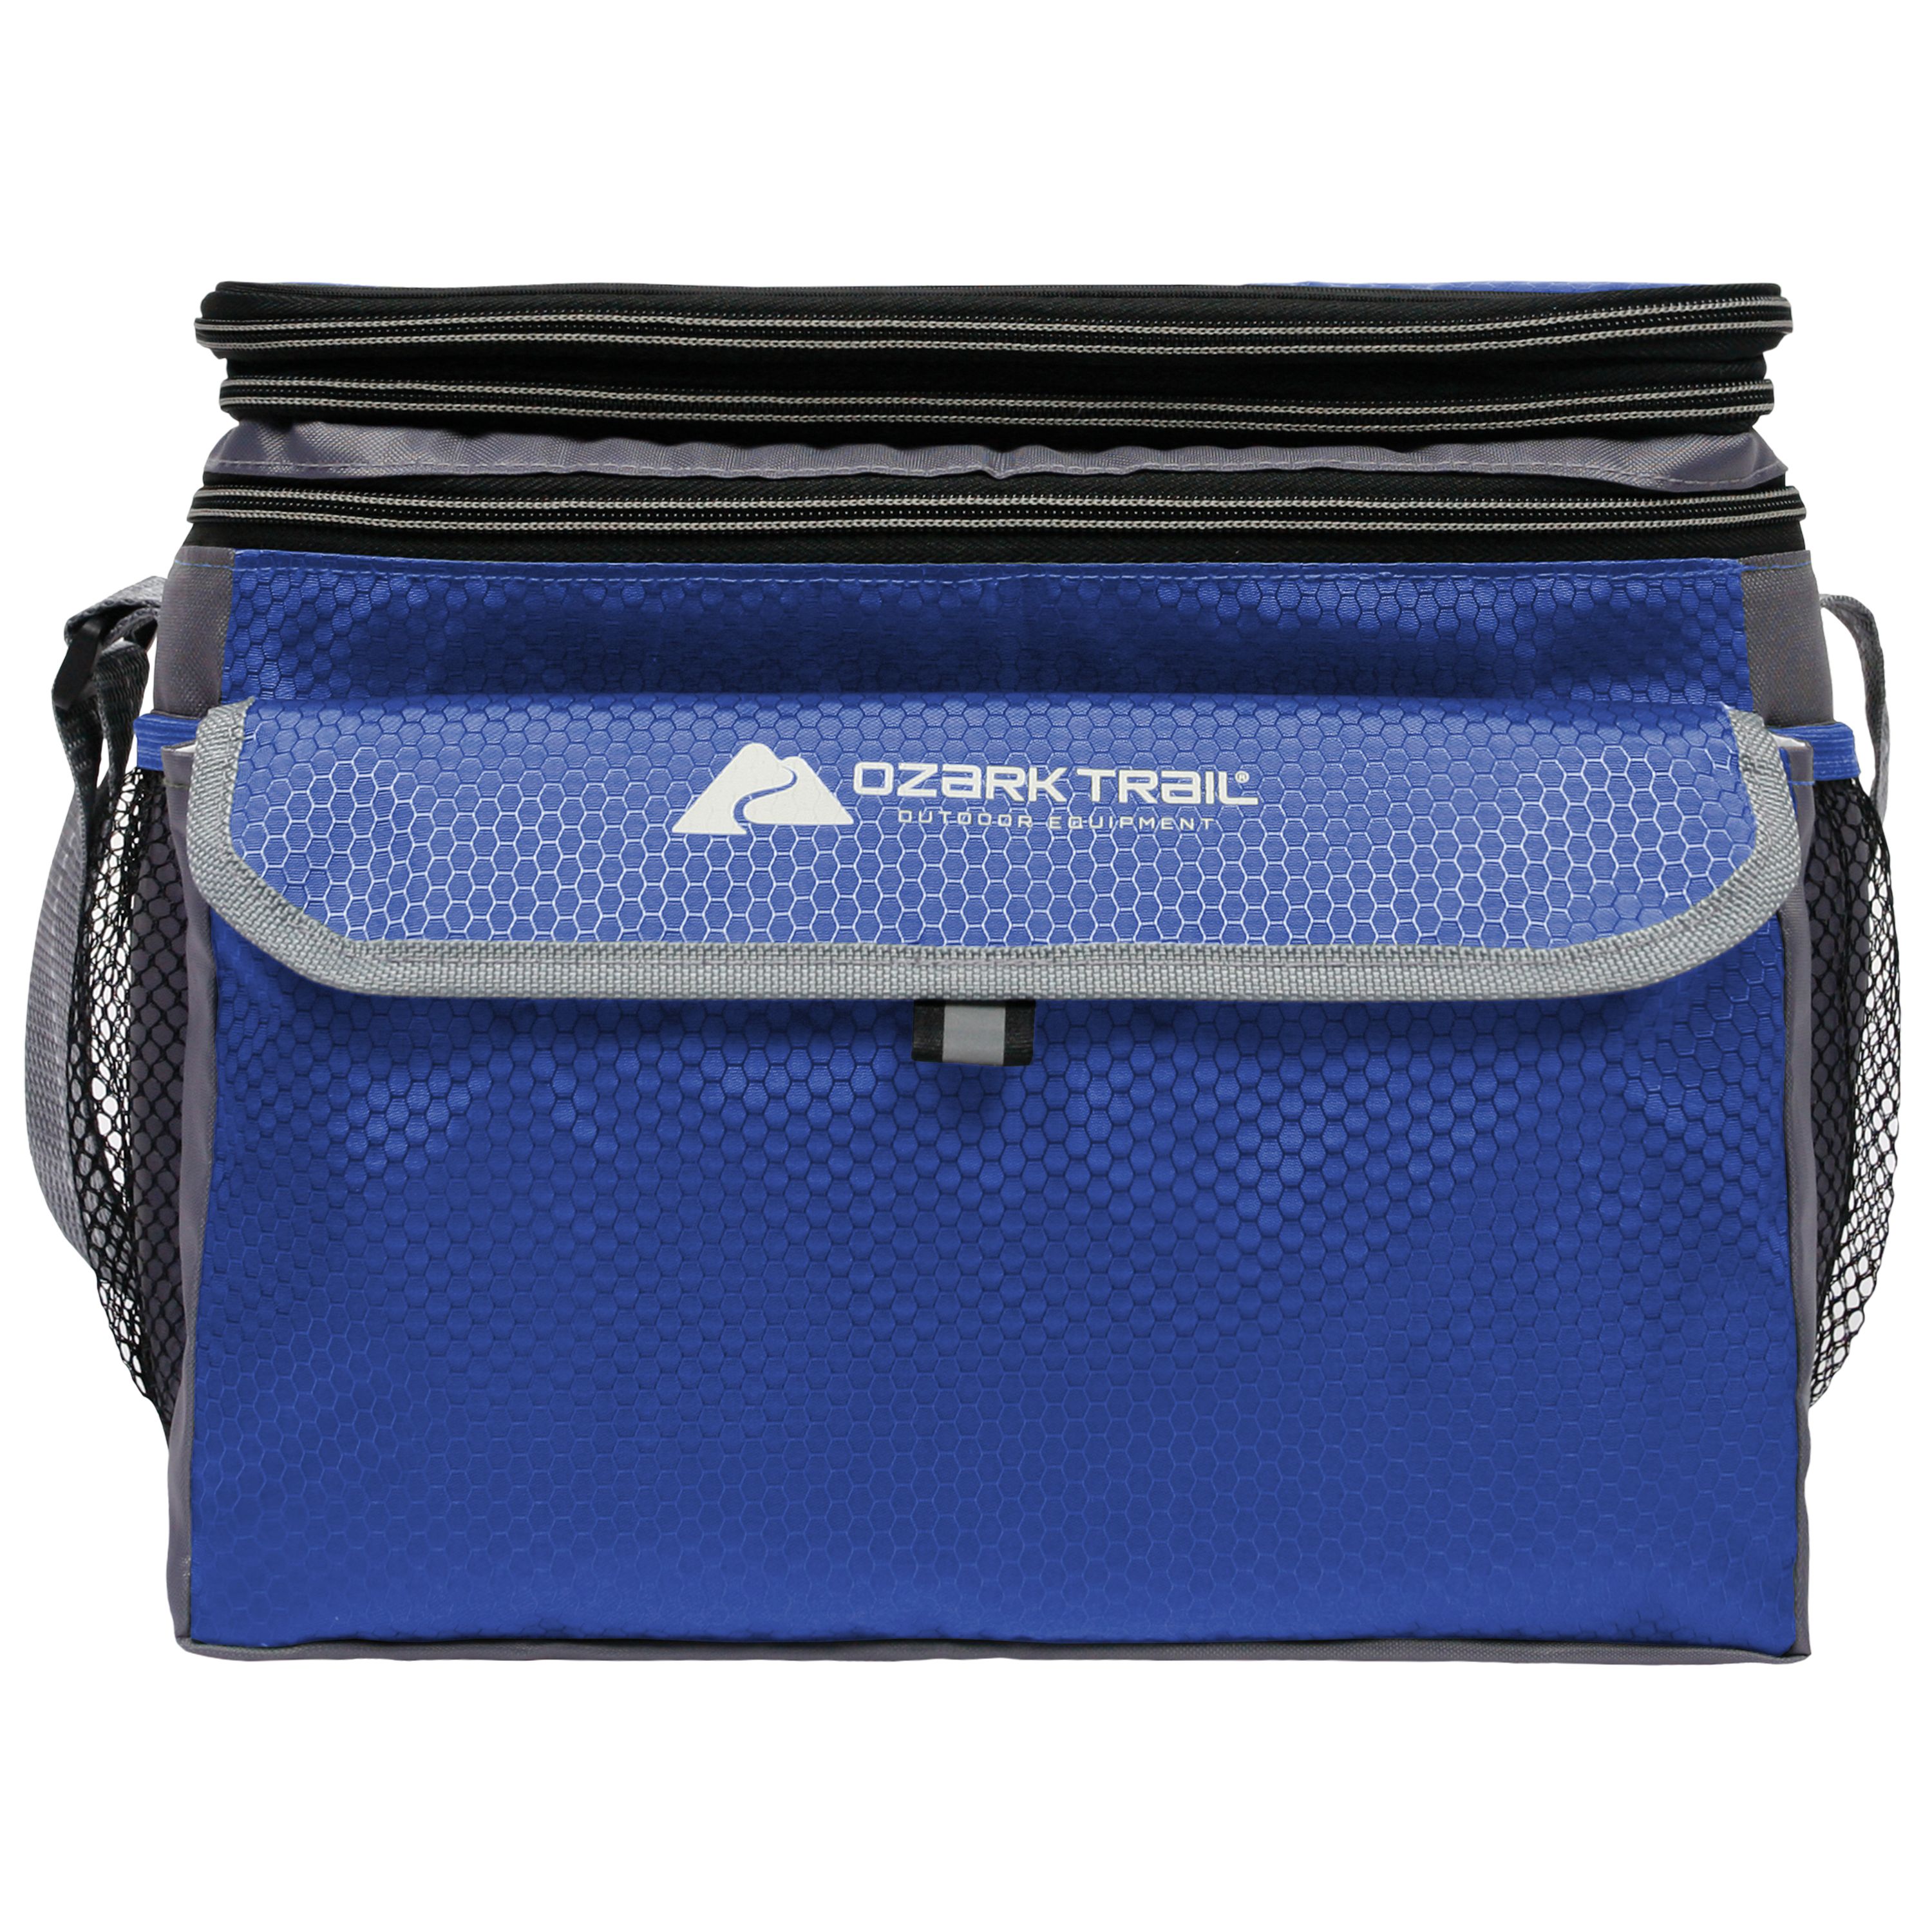 Ozark Trail 12 Can Soft Sided Cooler, Blue - image 1 of 5